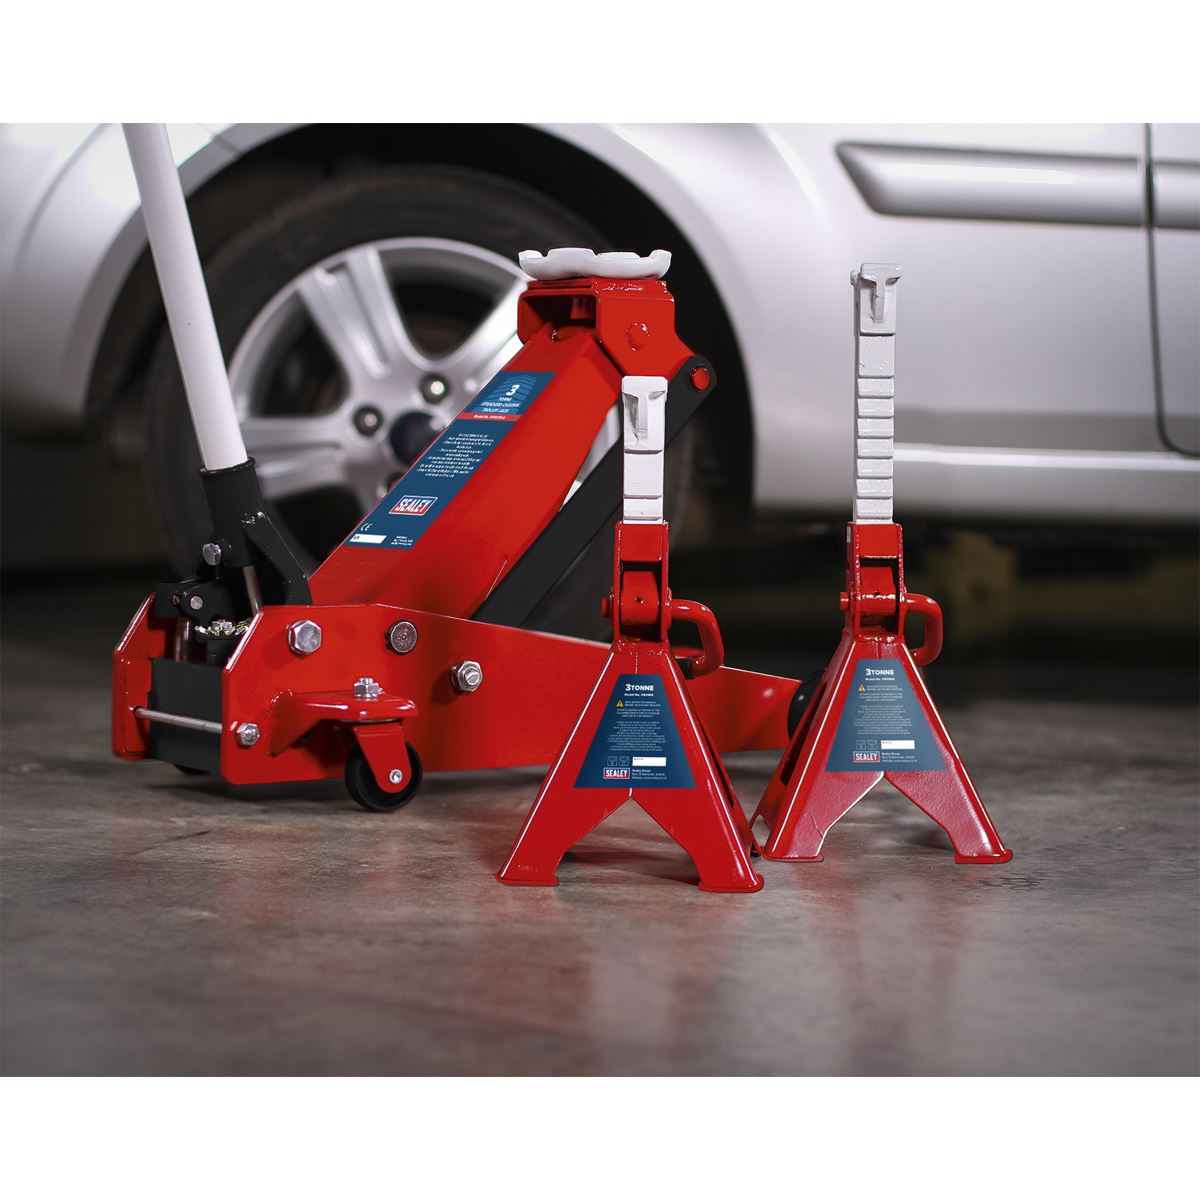 Sealey Standard Chassis Trolley Jack 3 Tonne with Axle Stands (Pair) 3 Tonne Capacity per Stand